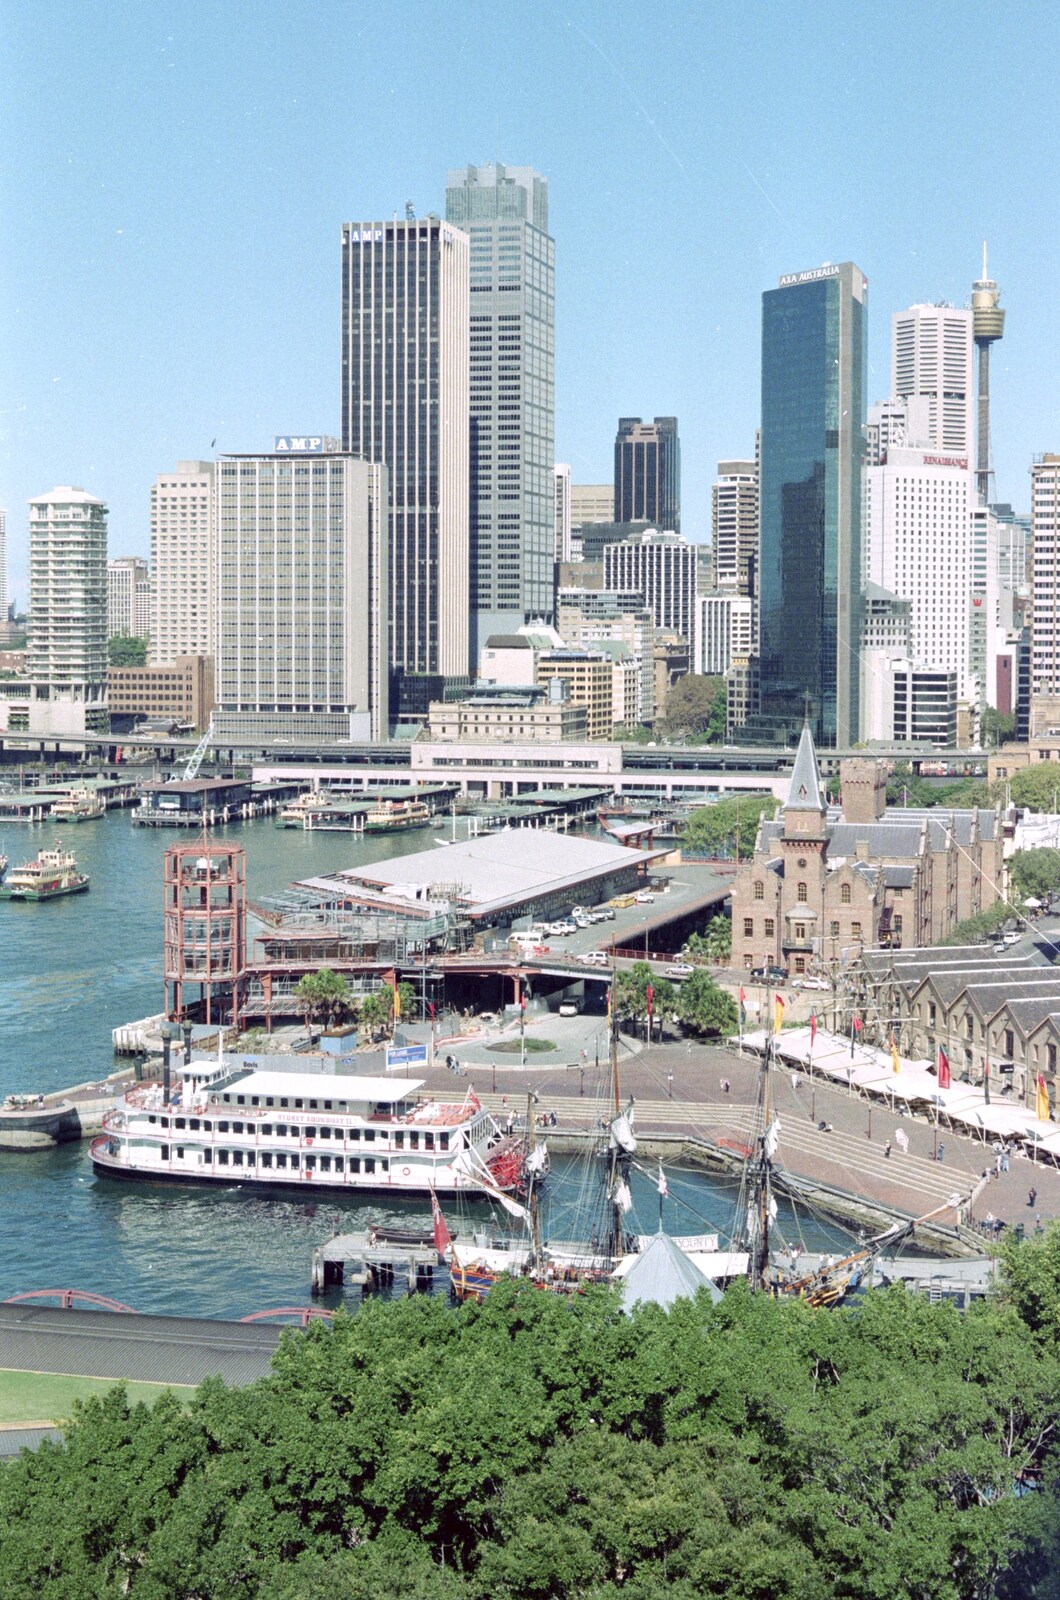 A view of Circular Quay from A Trip to the Blue Mountains, New South Wales, Australia - 12th April 2000